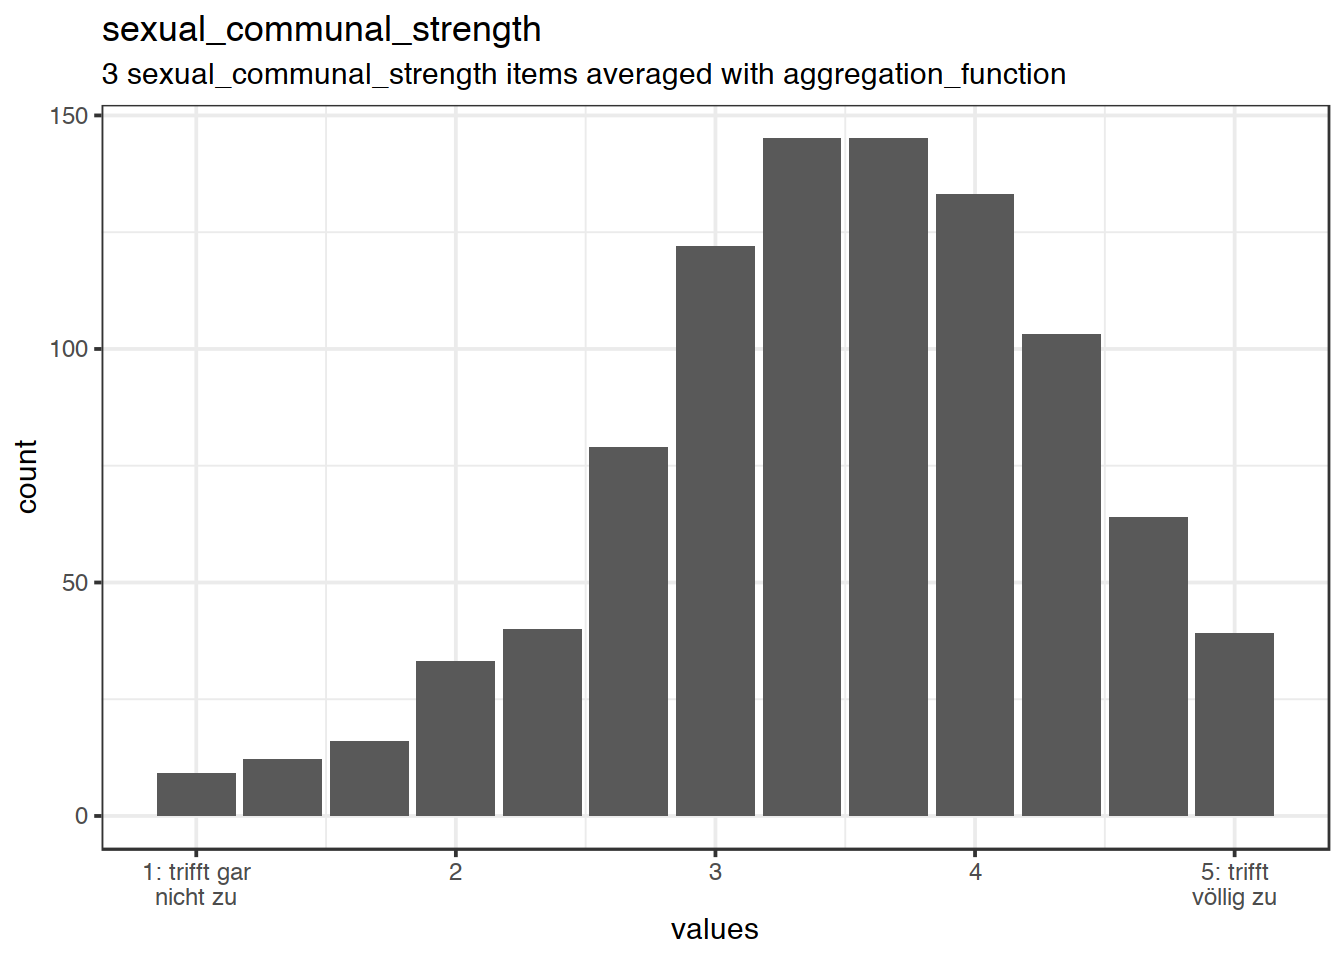 Distribution of scale sexual_communal_strength